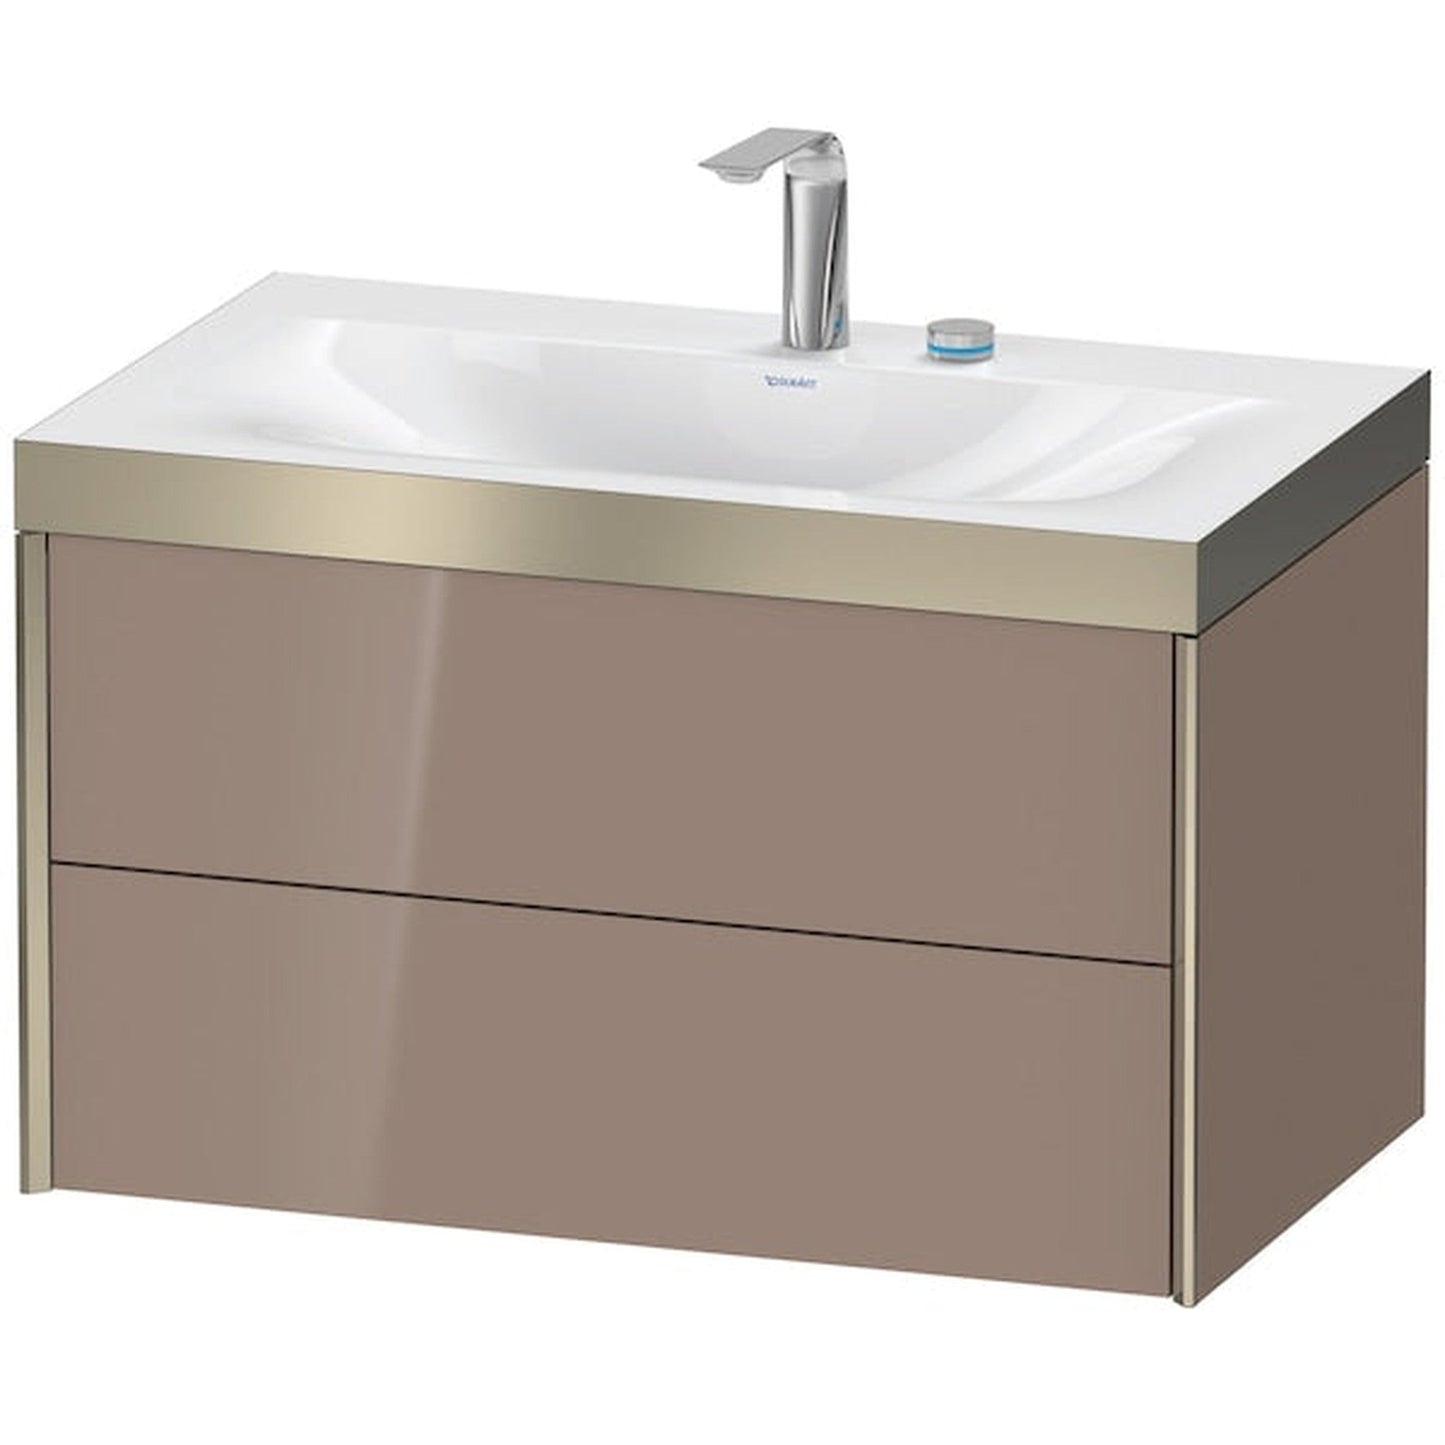 Duravit Xviu 31" x 20" x 19" Two Drawer C-Bonded Wall-Mount Vanity Kit With Two Tap Holes, Cappuccino (XV4615EB186P)